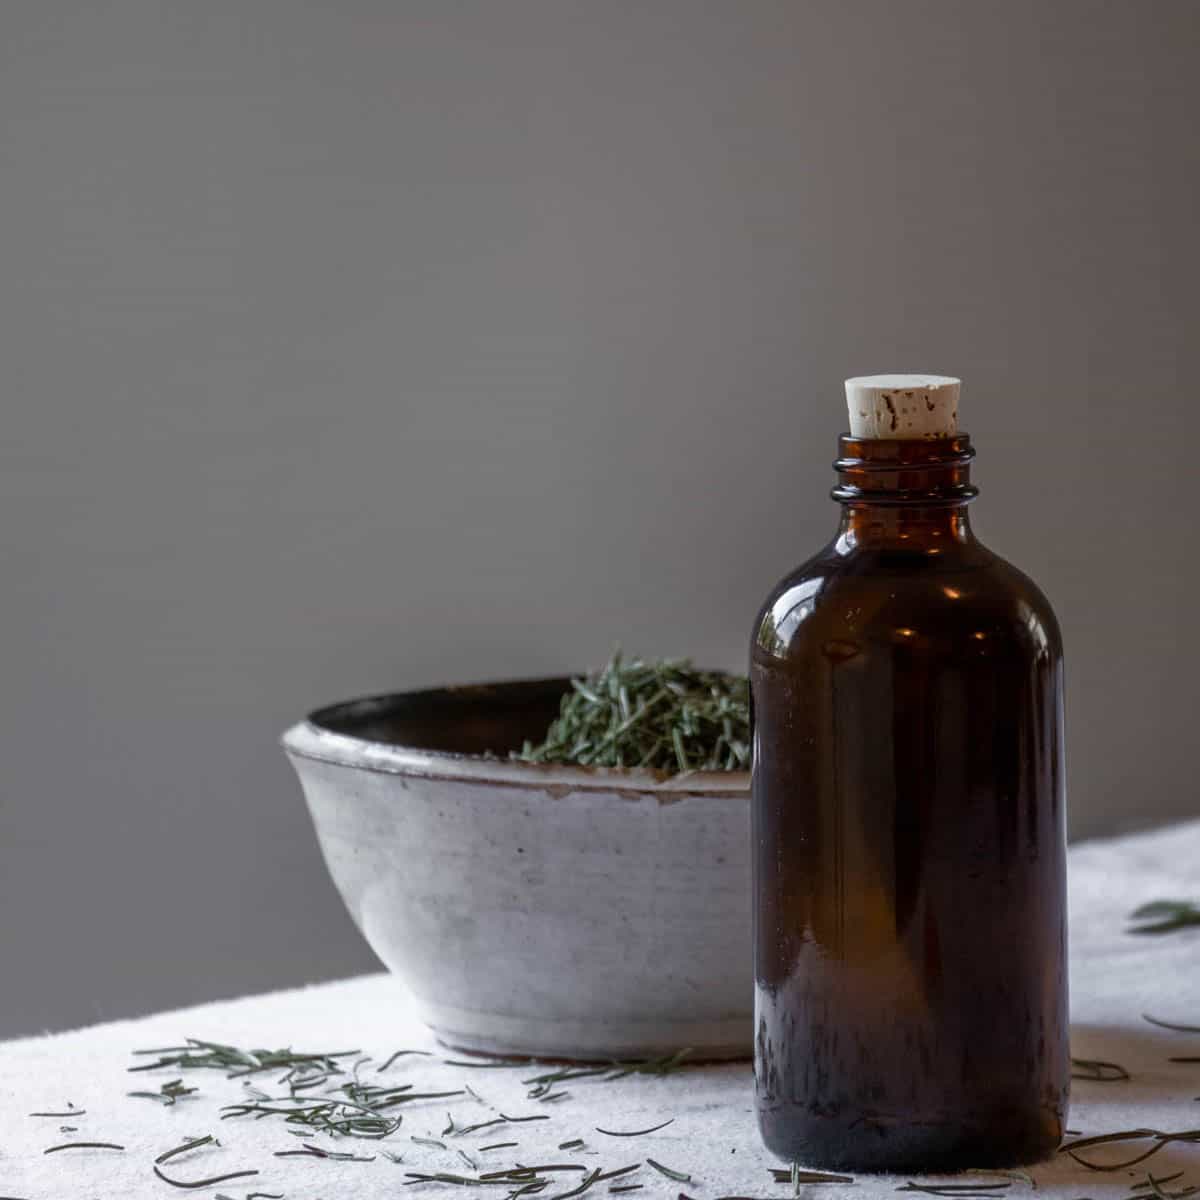 A bottle of rosemary oil next o a bowl of dried rosemary leaves